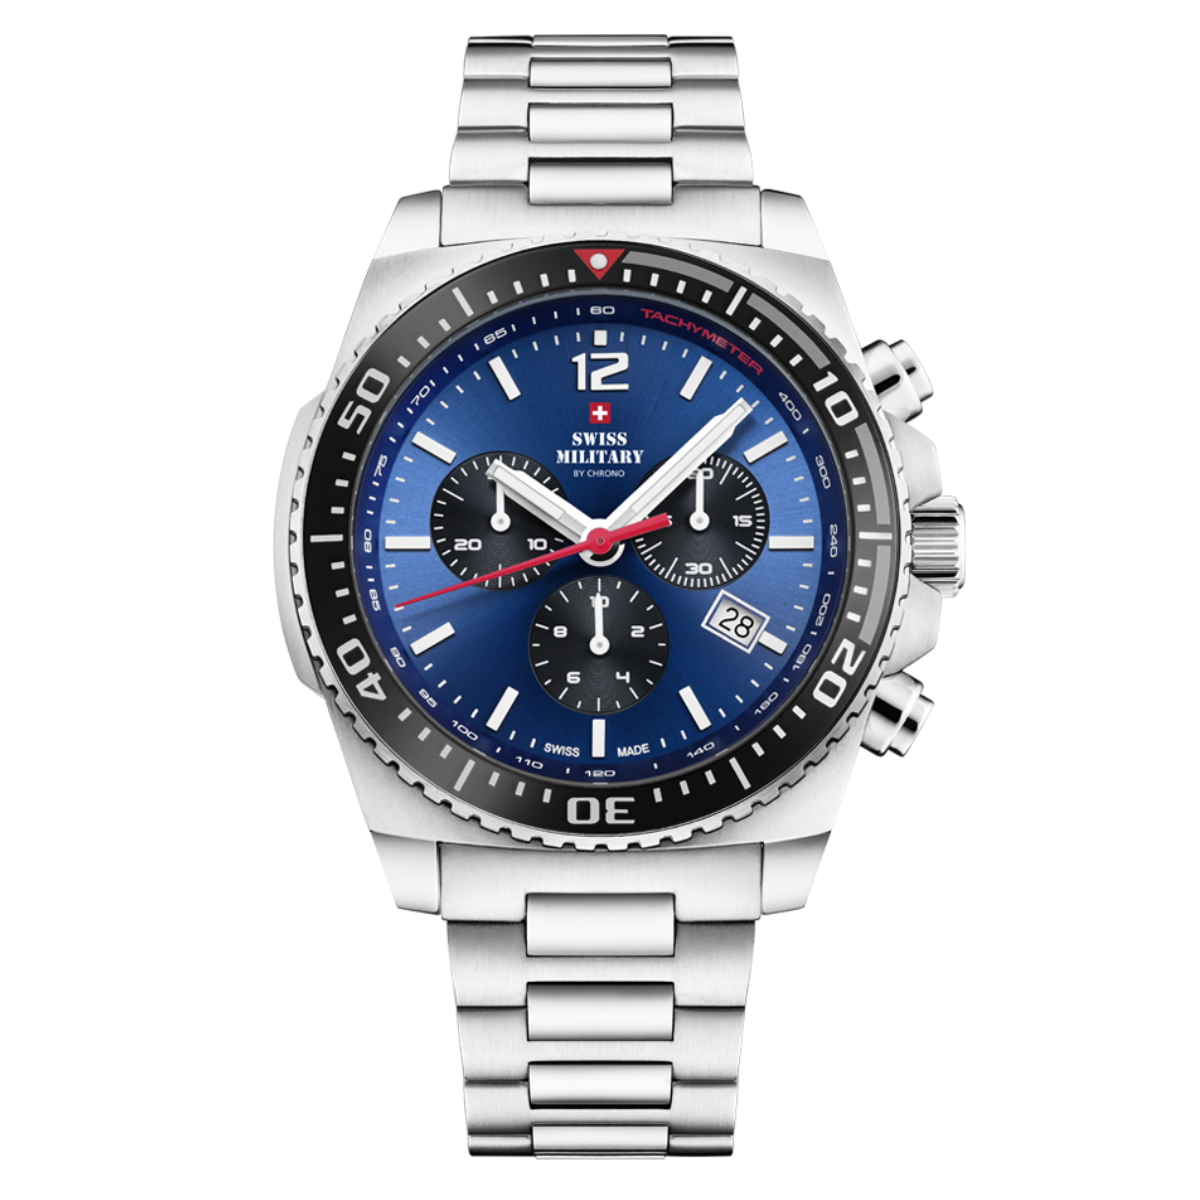 Swiss Military Gents Chronograph Watch SM34093.02 - Swiss Made Luxury Watch Luxury Watches For Men Men’s Stainless Steel Watch Men's Blue Dial Watches